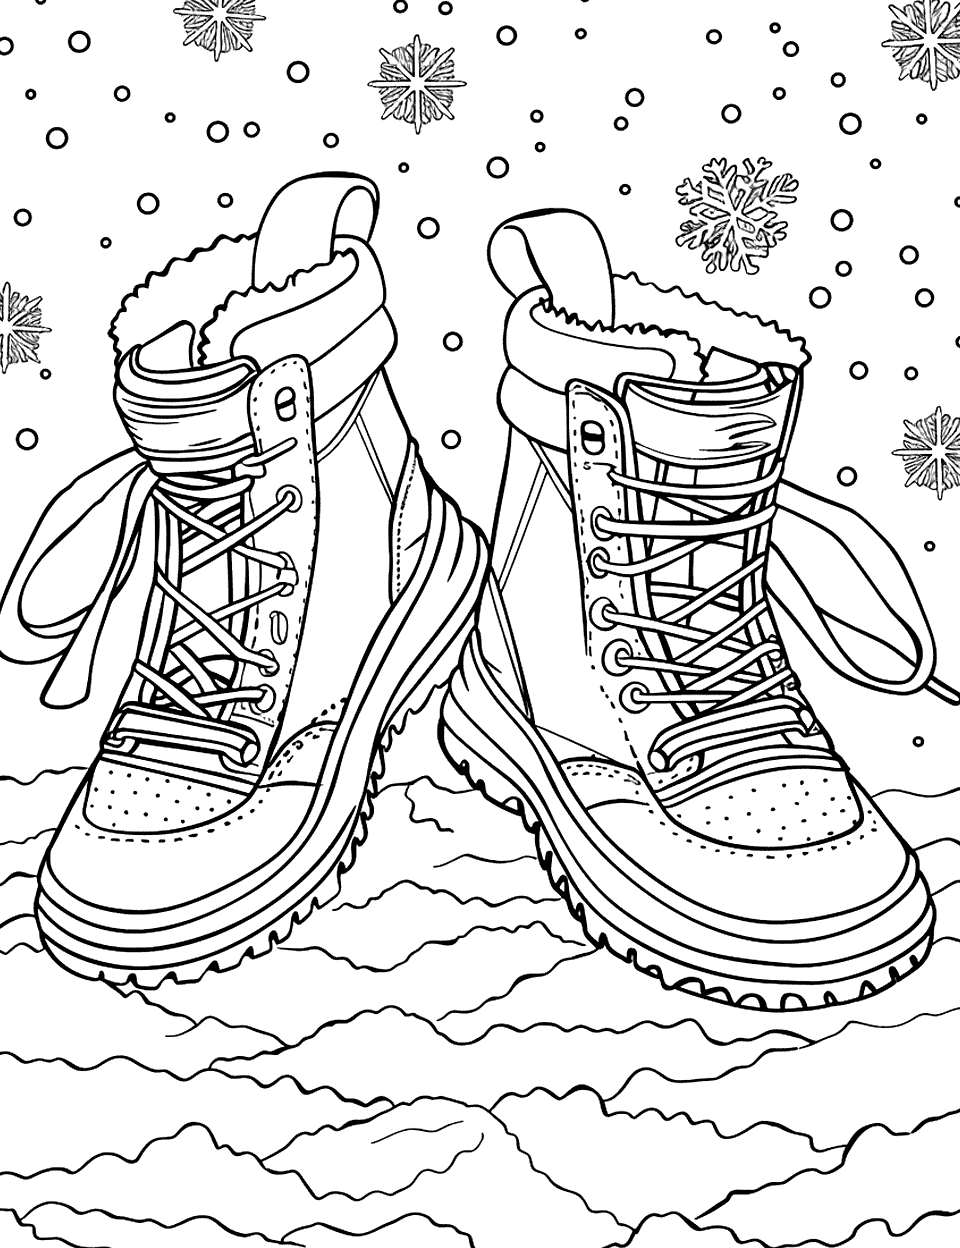 Snow Boots in Winter Wonderland Shoe Coloring Page - Cozy snow boots surrounded by snow.